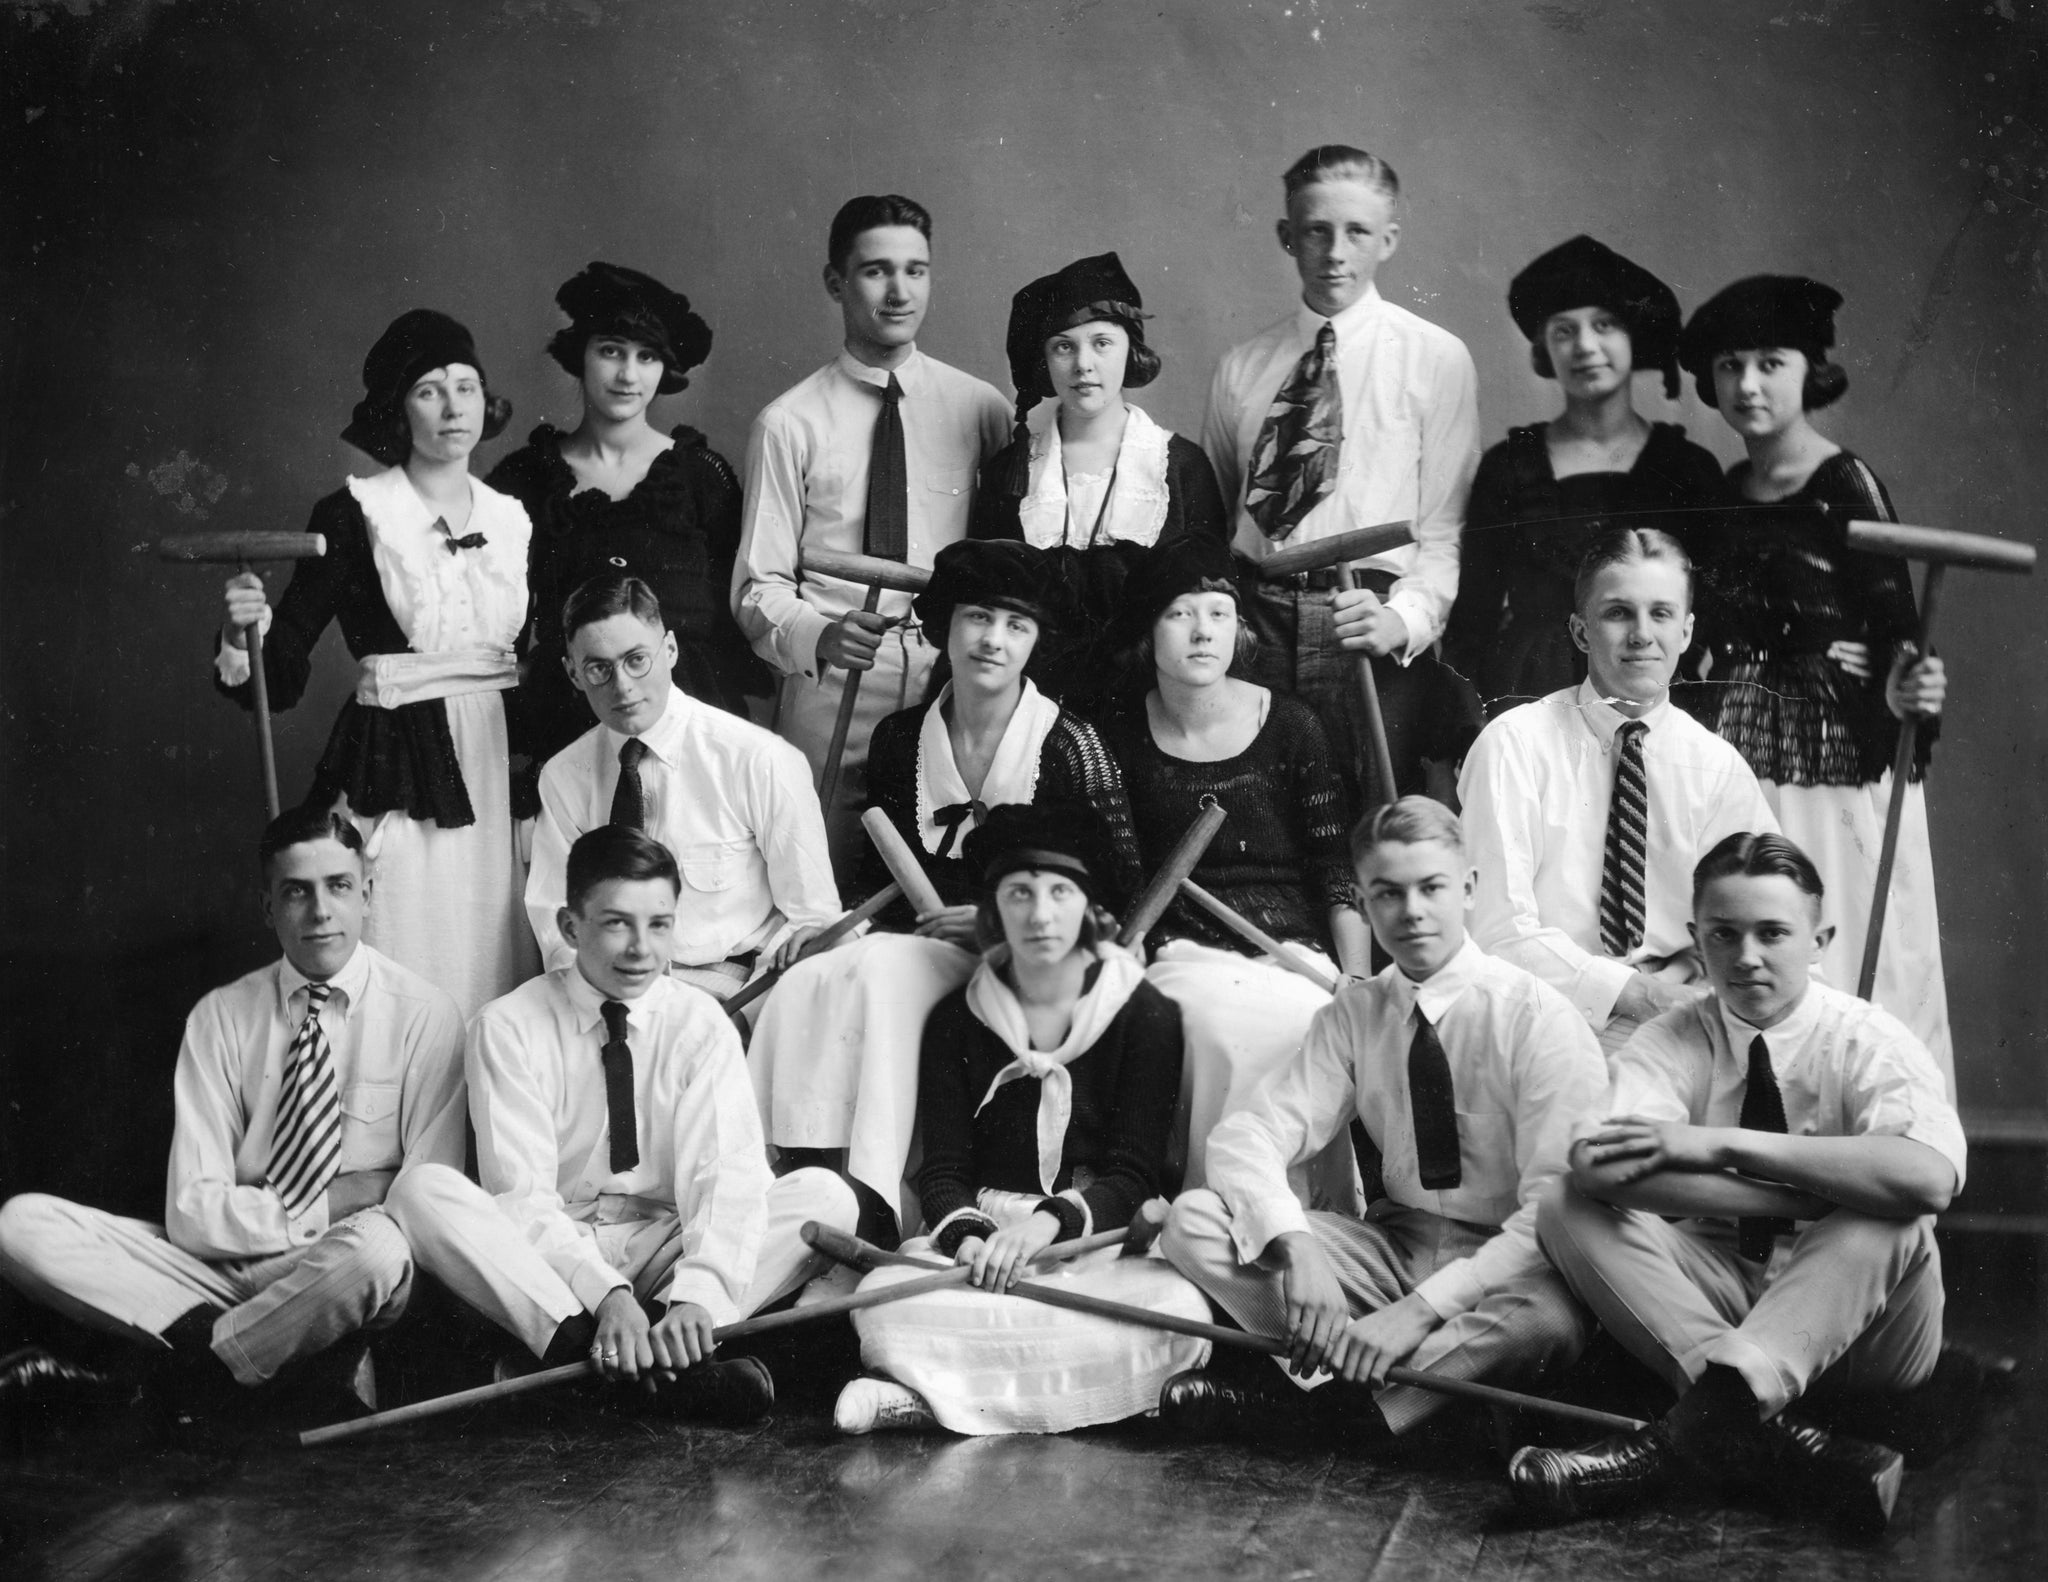 Davenport High School show, circa 1920. Front right is Bix Beiderbecke. His girlfriend, Vera Cox, is back row, second from right. -- Quad-City Times